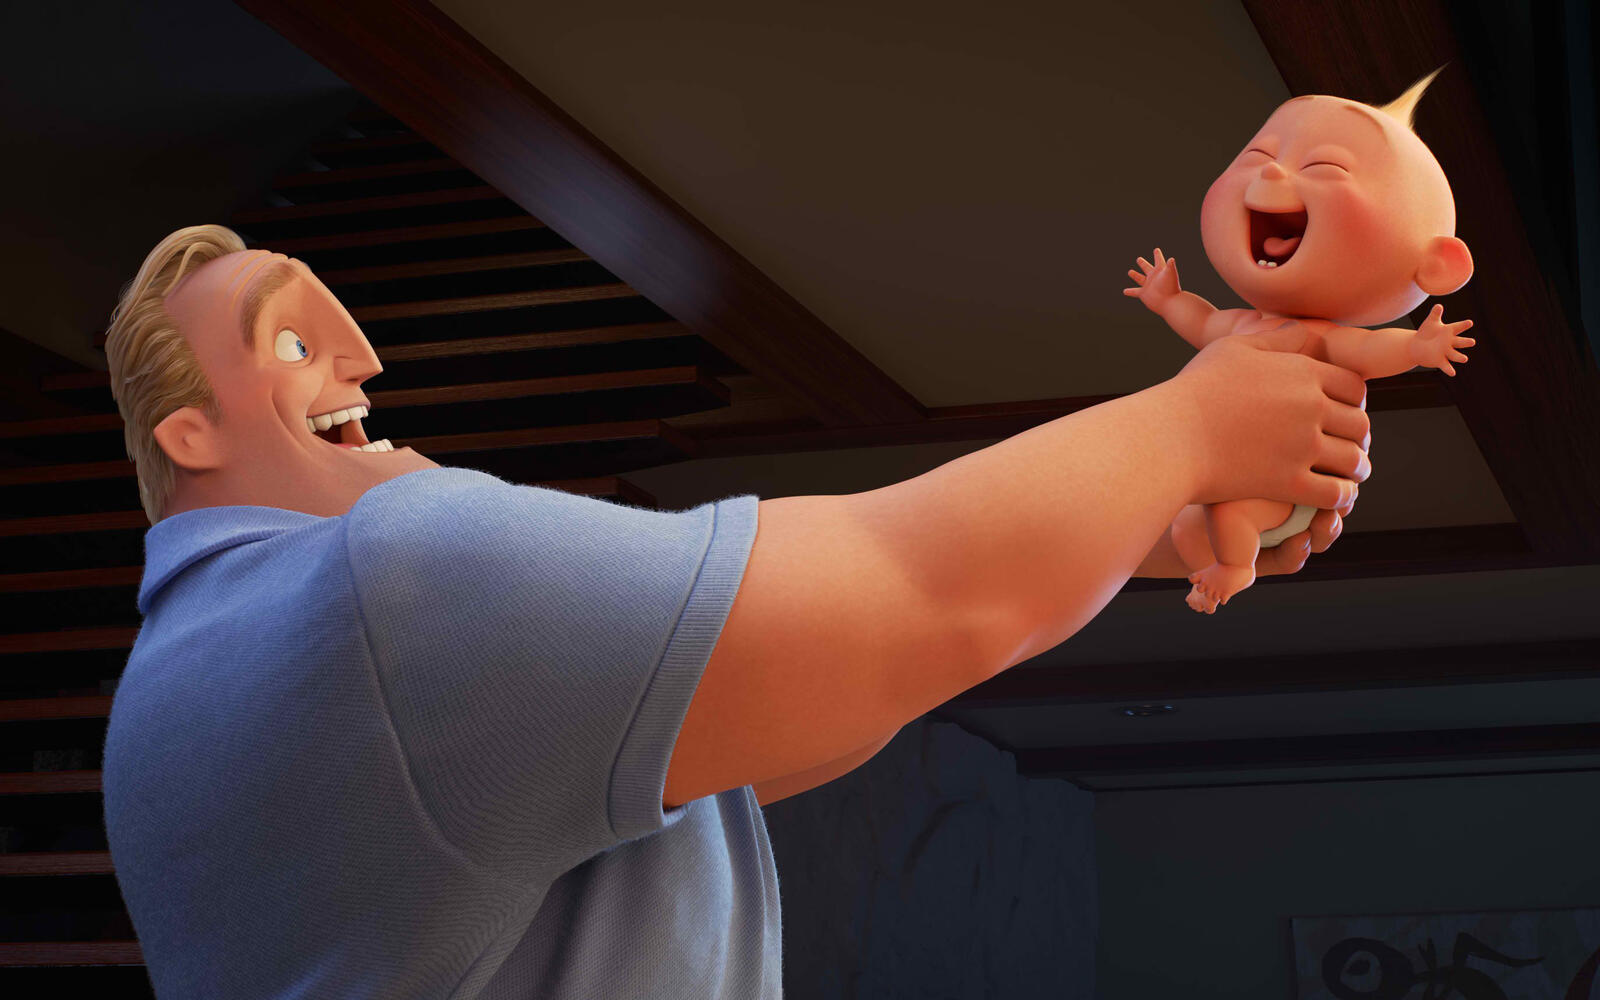 Wallpapers movies toddler The Incredibles 2 on the desktop